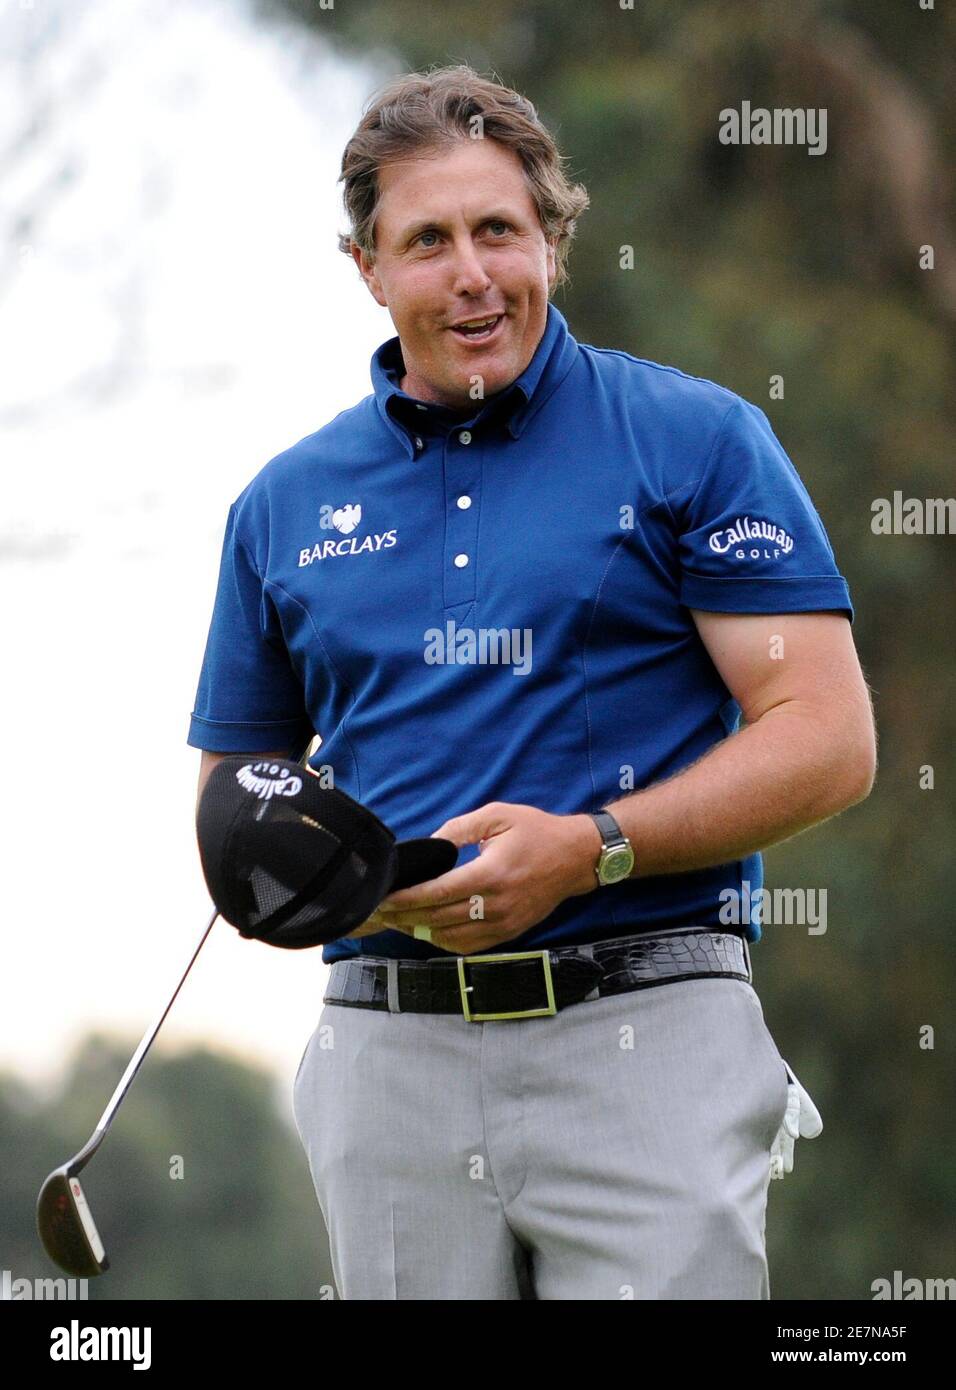 Golfer Phil Mickelson of the U.S. celebrates after sinking a putt on the eighteenth hole to win the Northern Trust Open golf tournament in the Pacific Palisades area of Los Angeles February 22, 2009. REUTERS/Gus Ruelas (UNITED STATES) Stock Photo